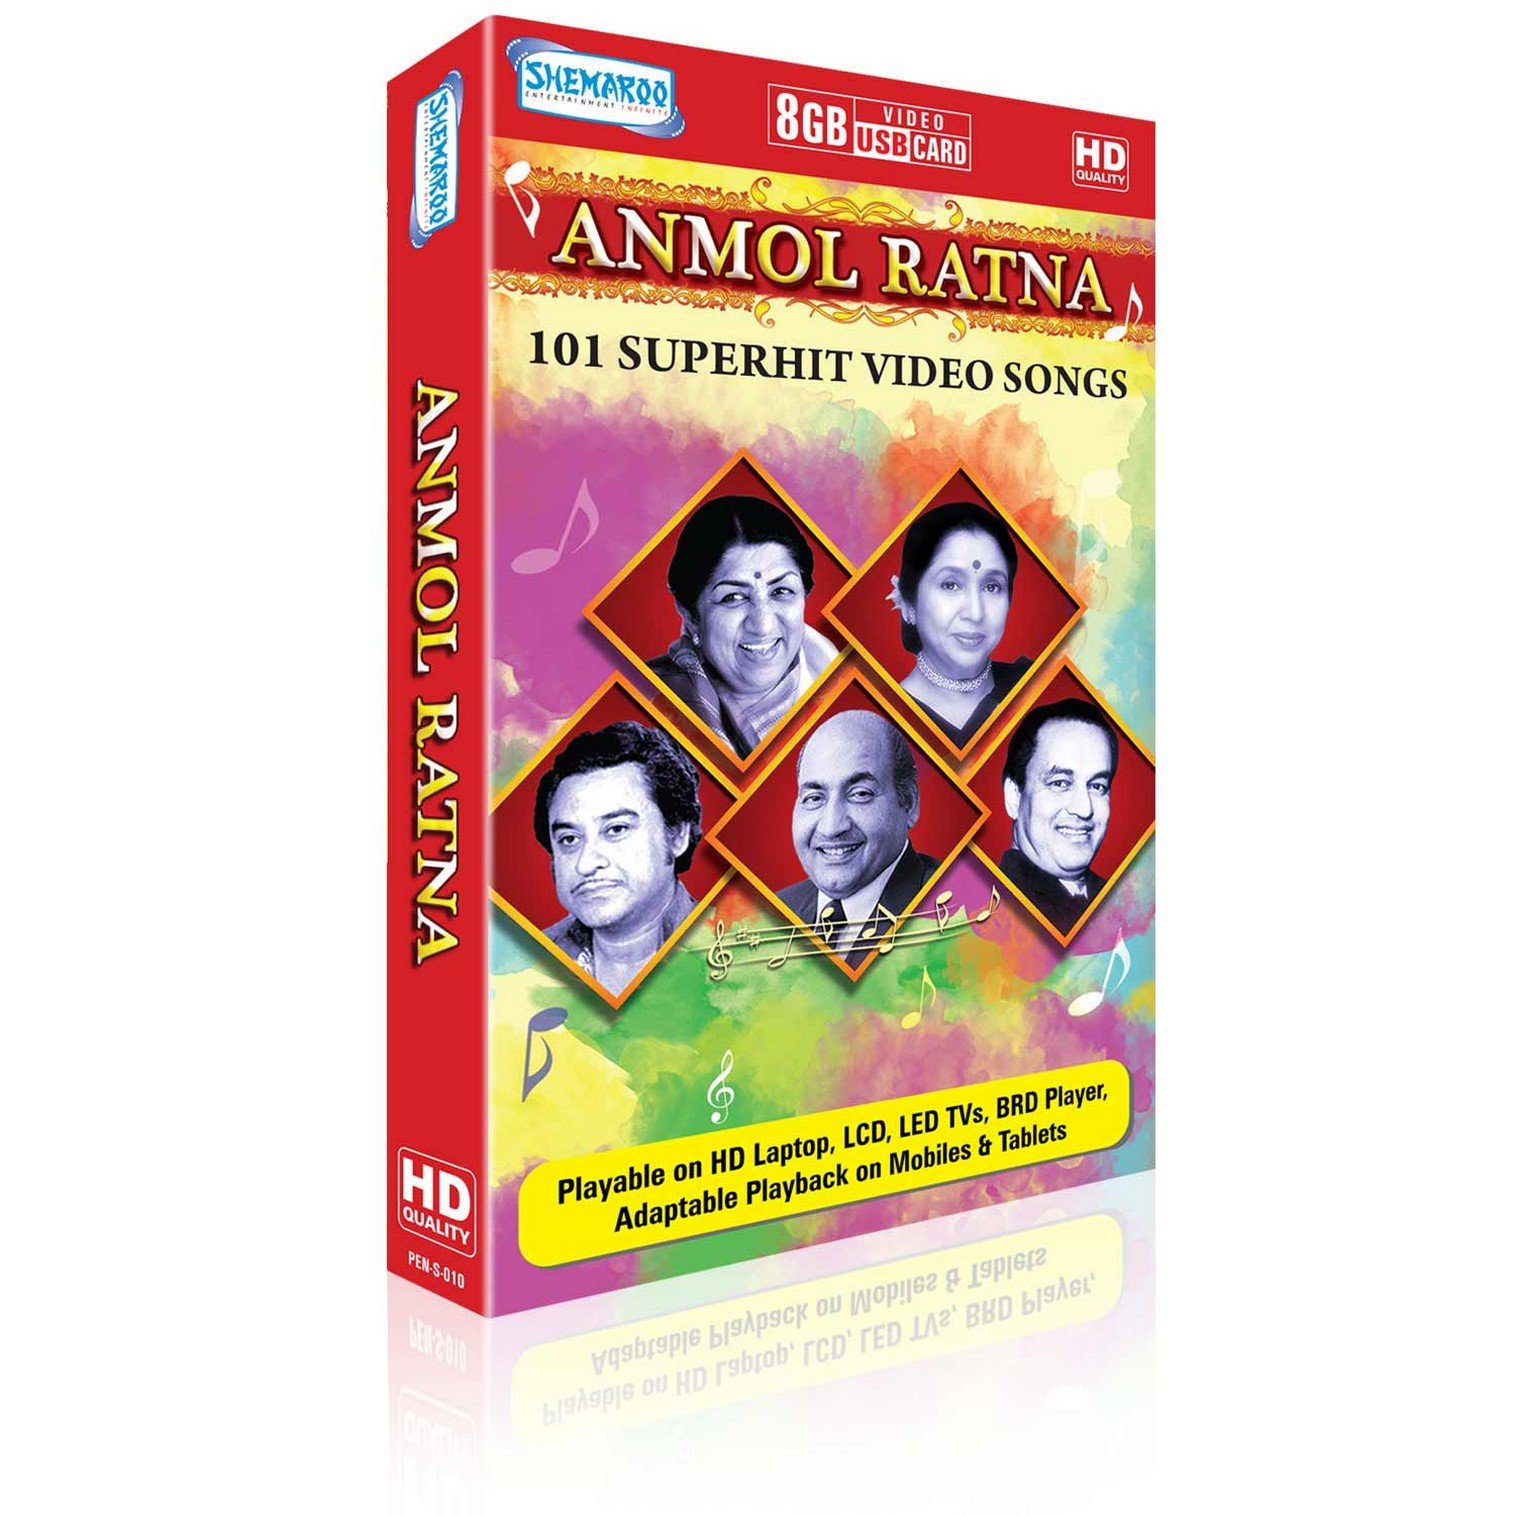 anmol-ratna-101-superhit-video-songs-movie-purchase-or-watch-online